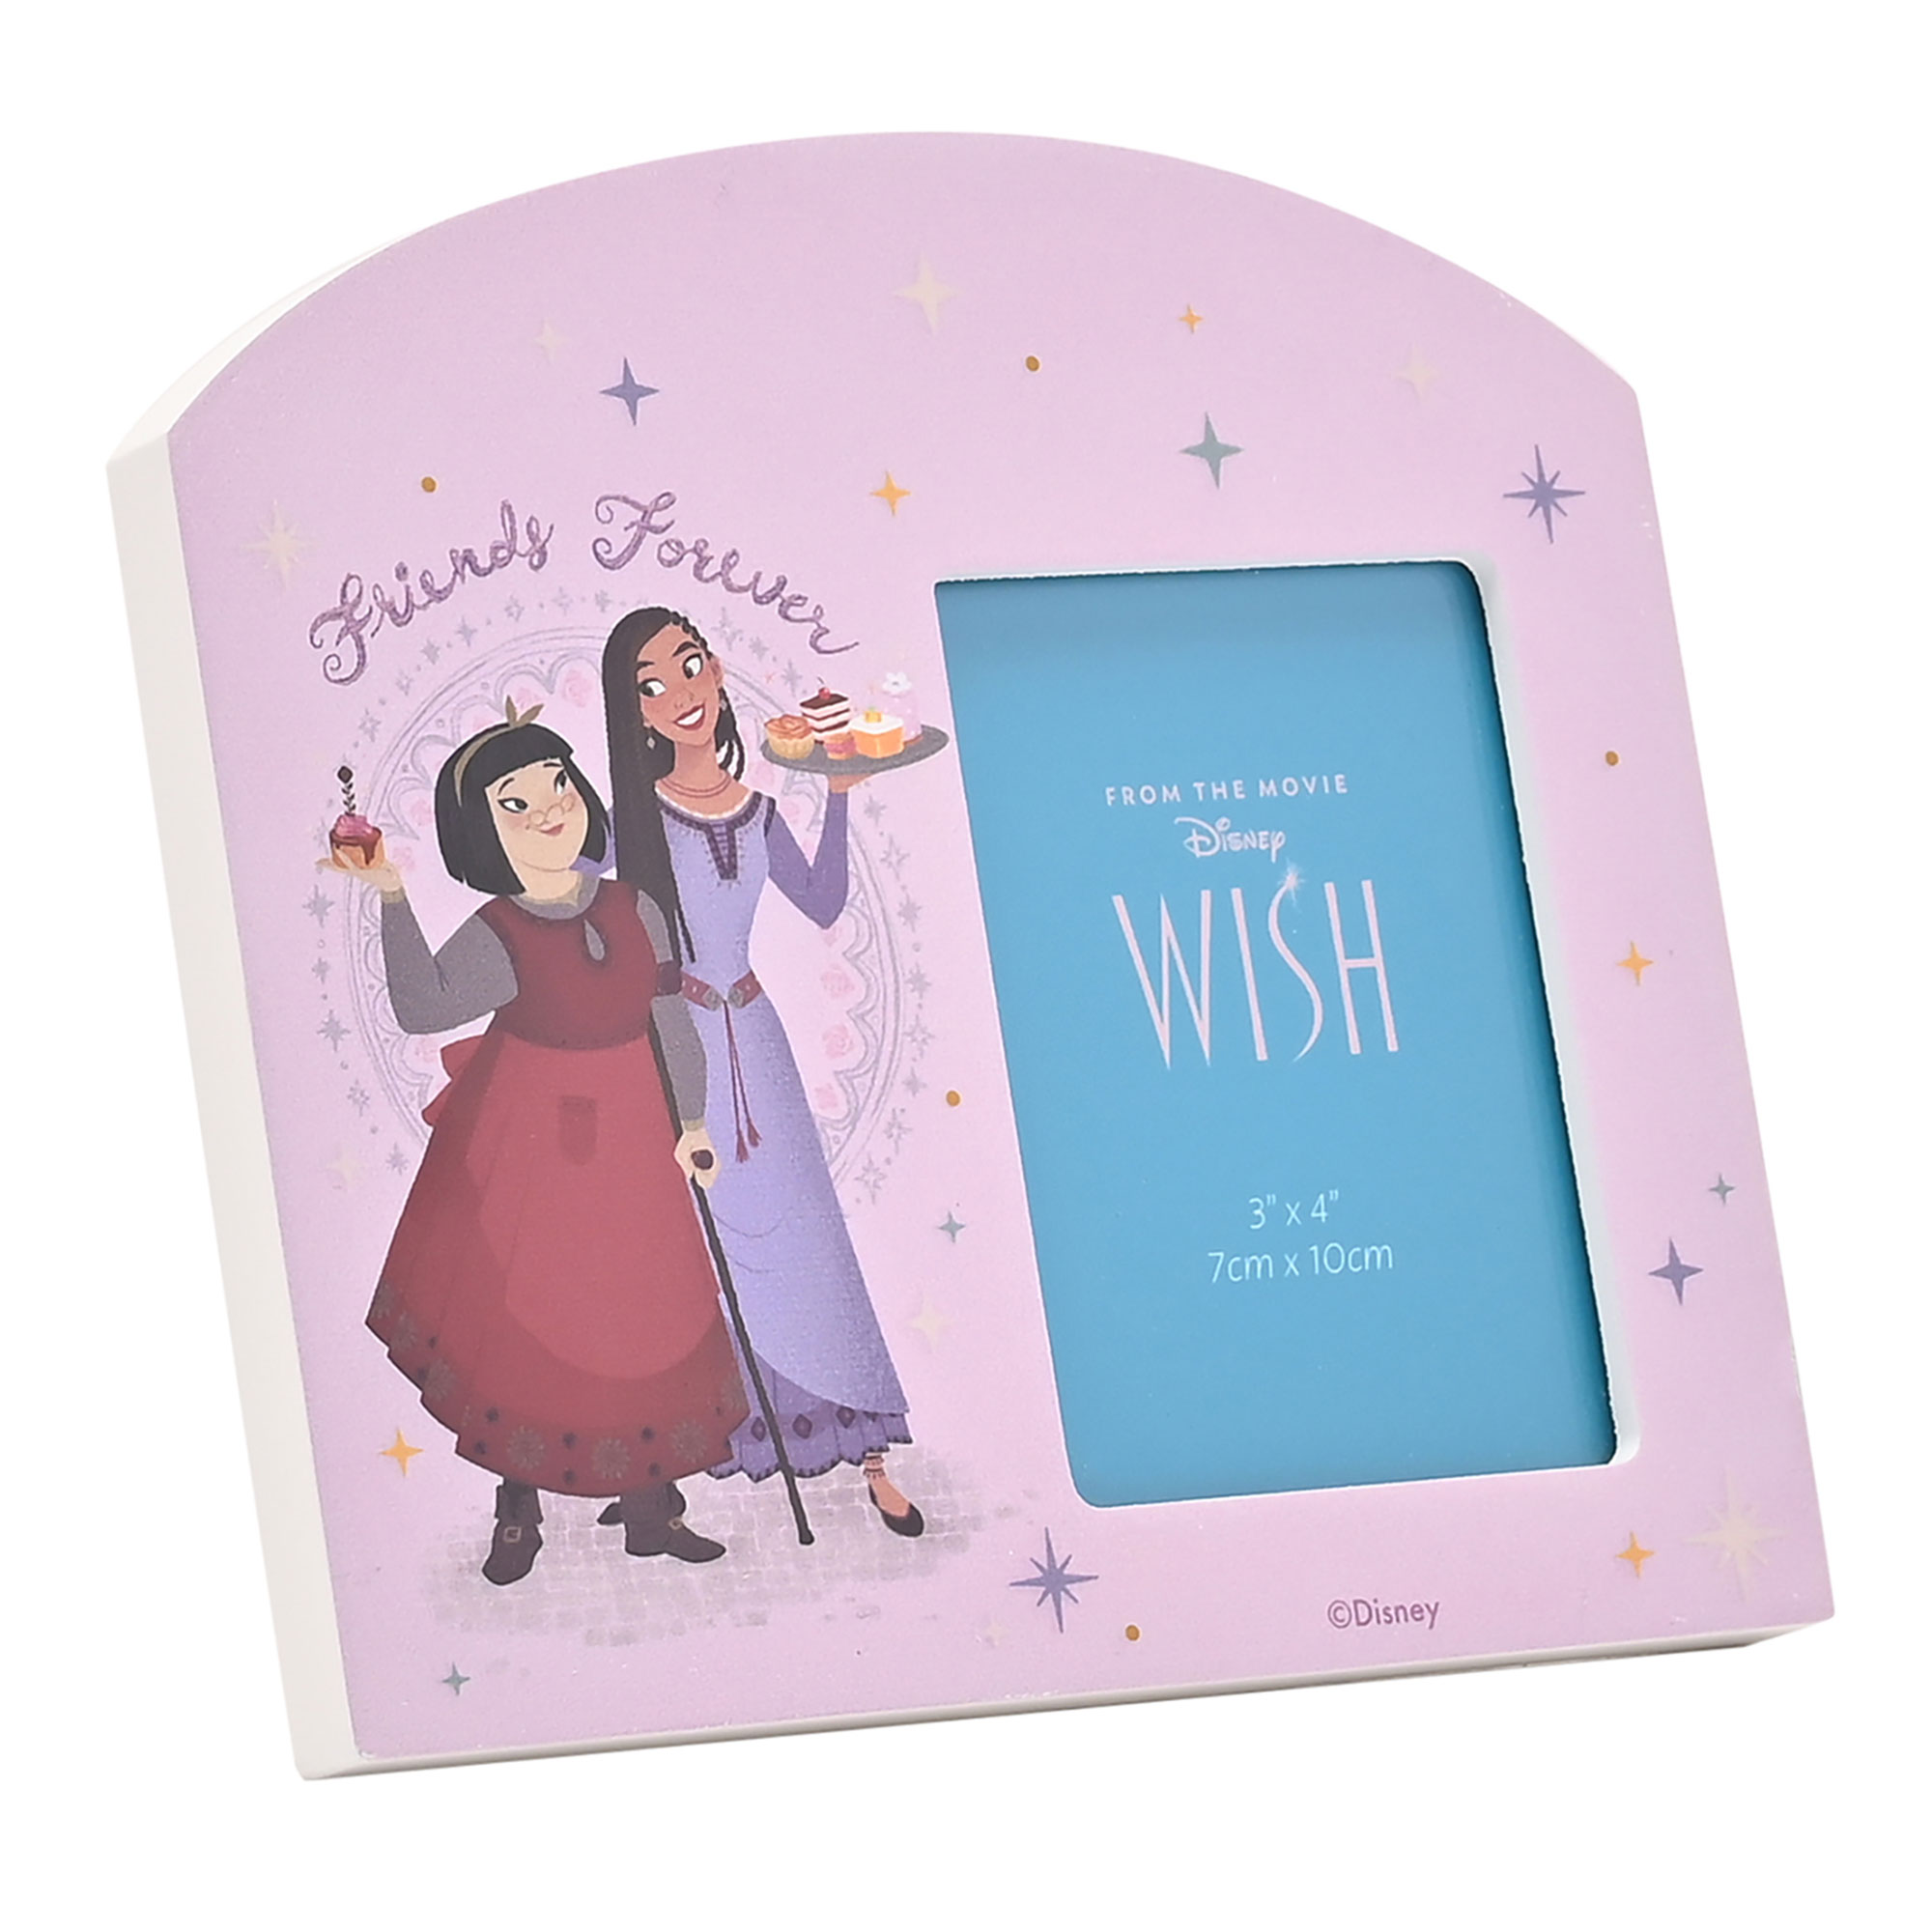 Disney Wish Arched Photo Frame - Friends Forever